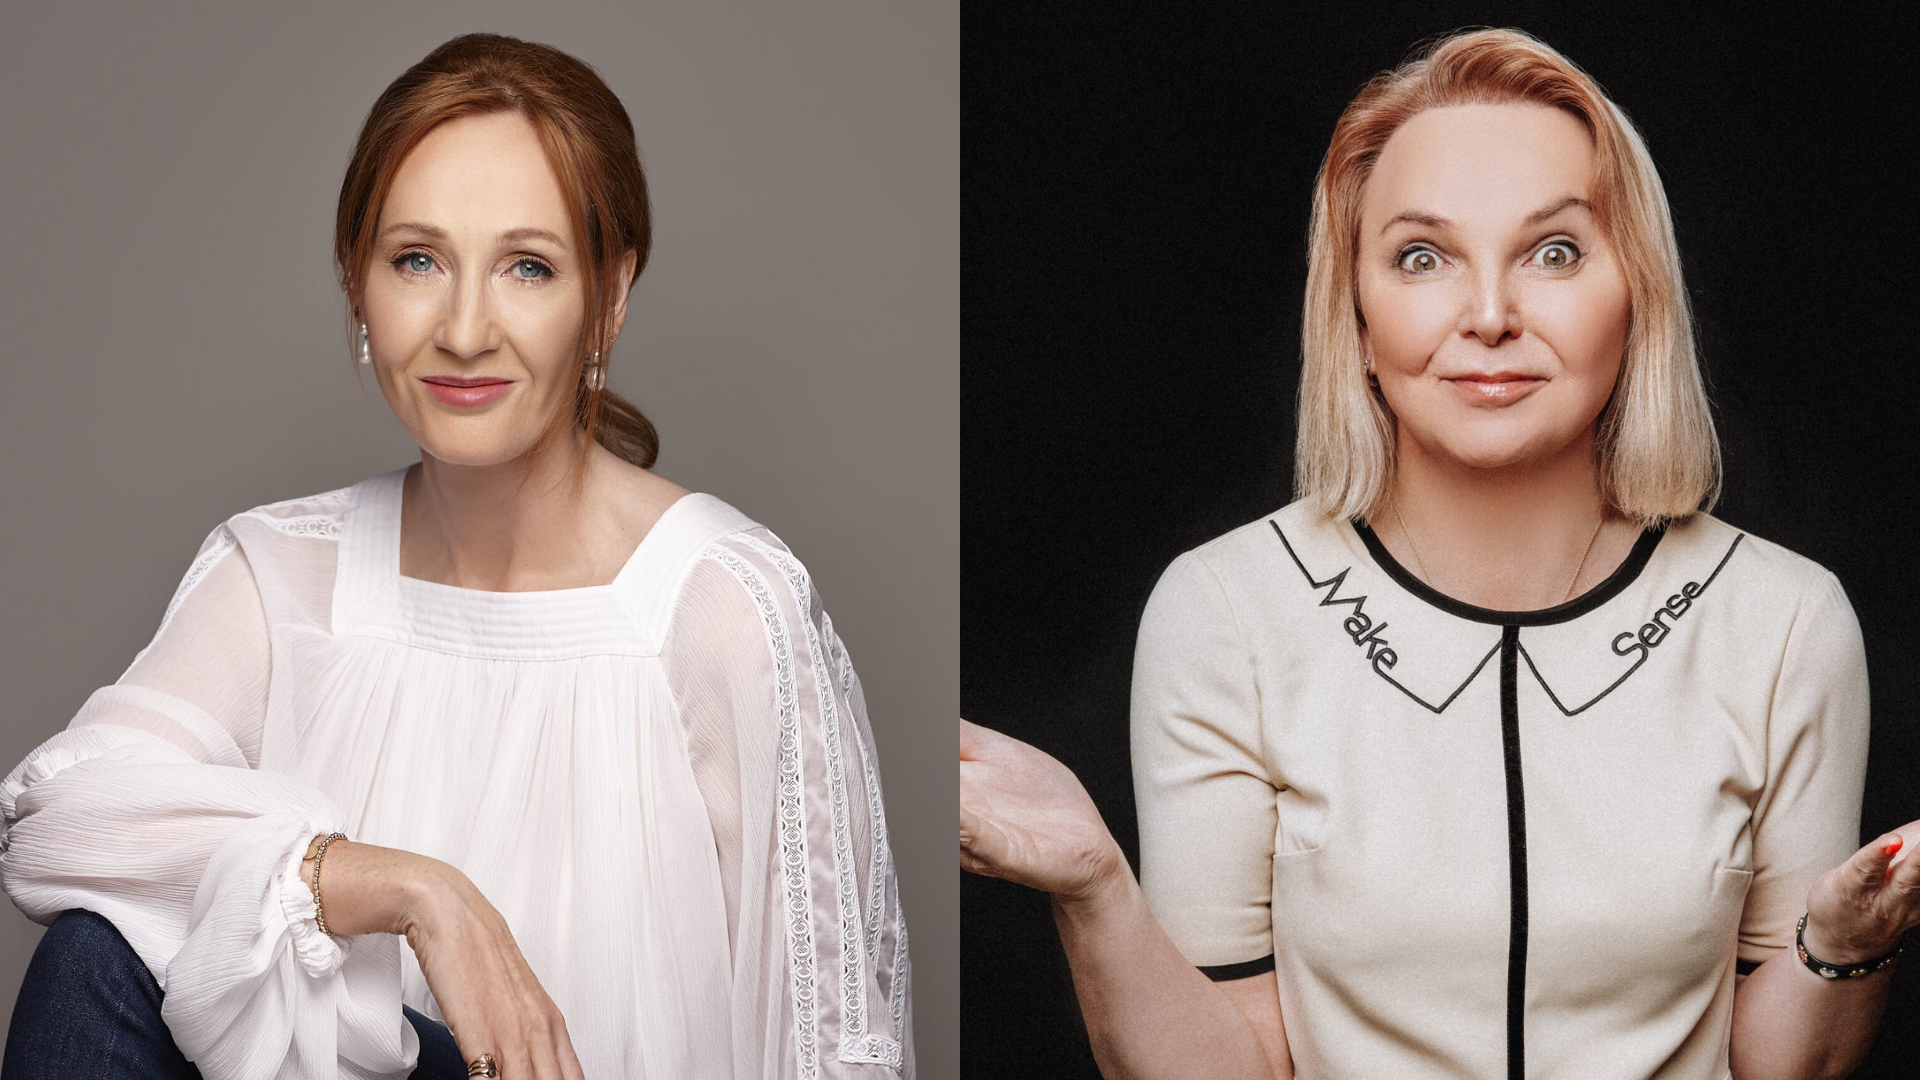 JK Rowling Accused Of Intentionally Misgendering Trans Newsreader India Willoughby